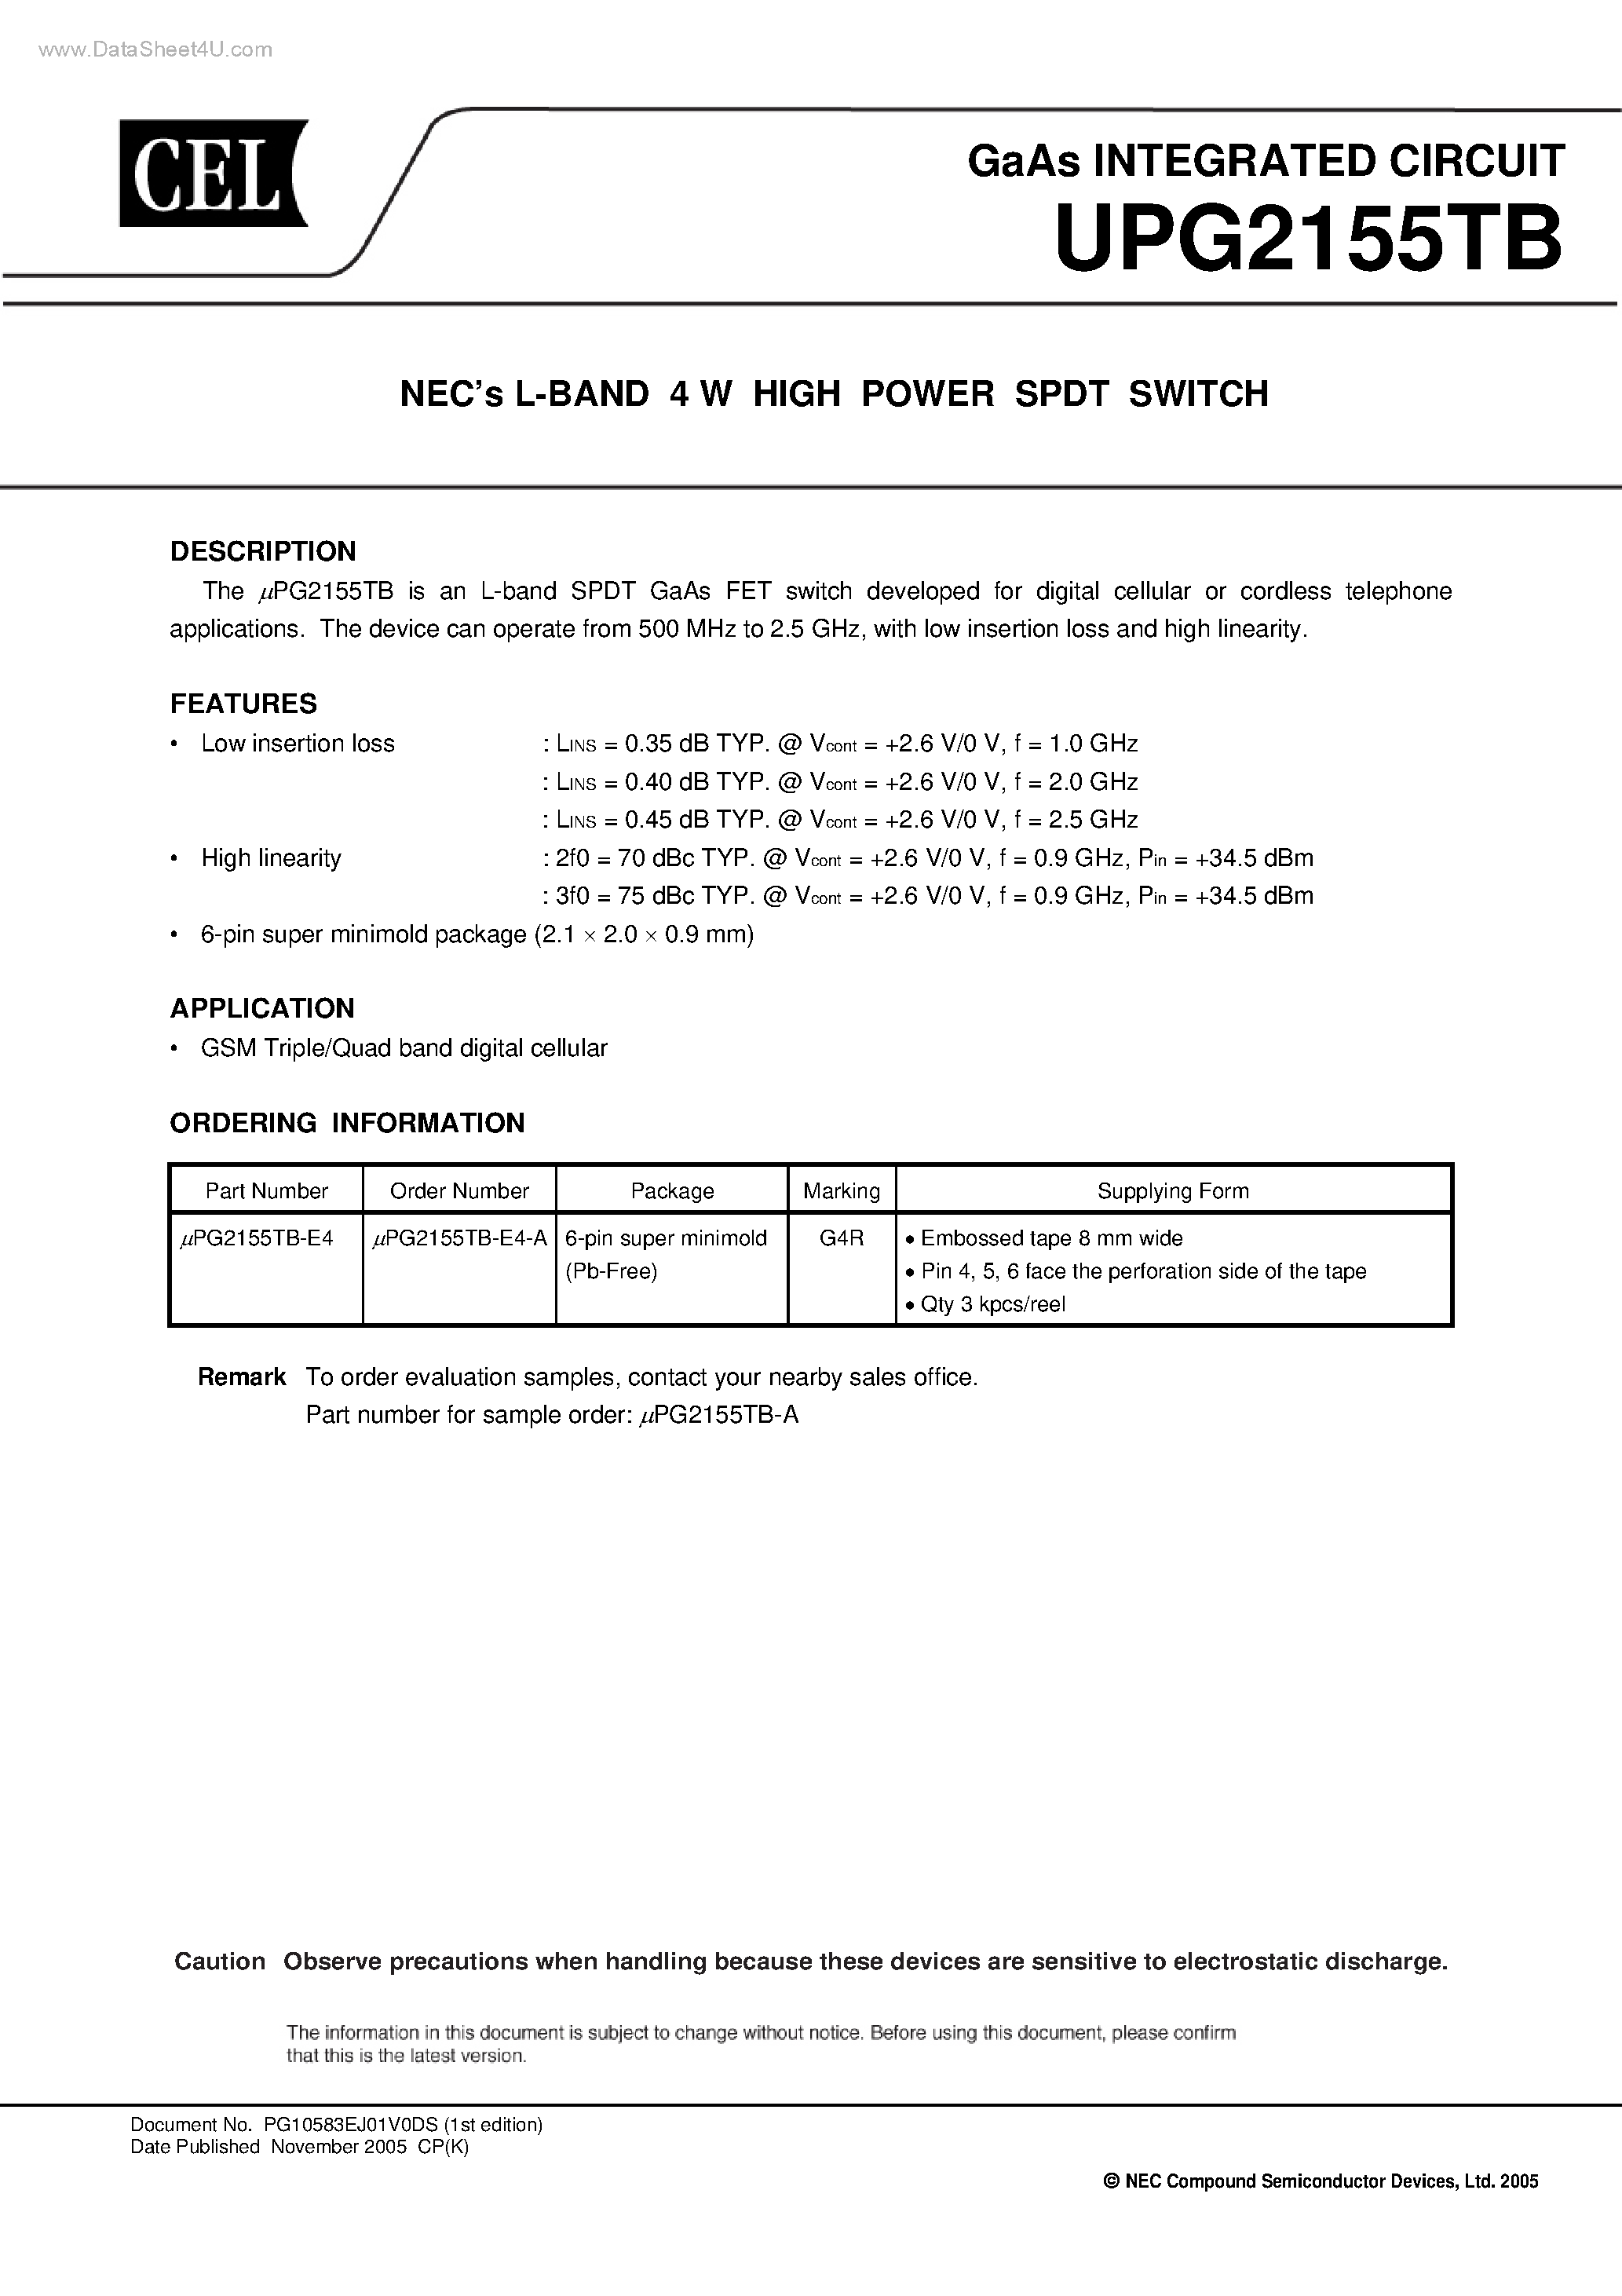 Datasheet UPG2155TB - L-BAND 4 W HIGH POWER SPDT SWITCH page 1